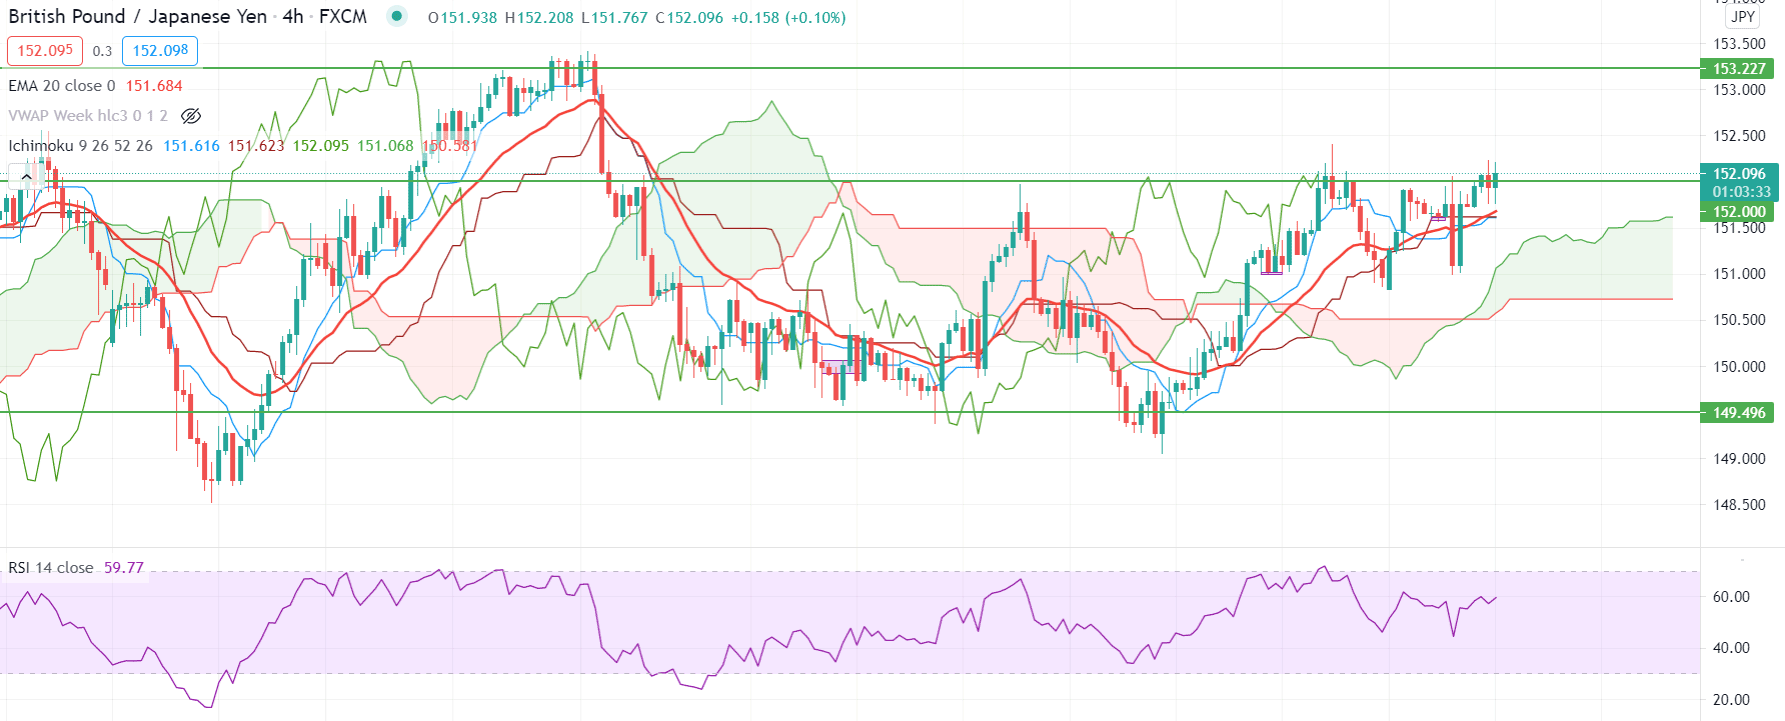 GBPJPY H4 Technical Analysis 5 May 2021